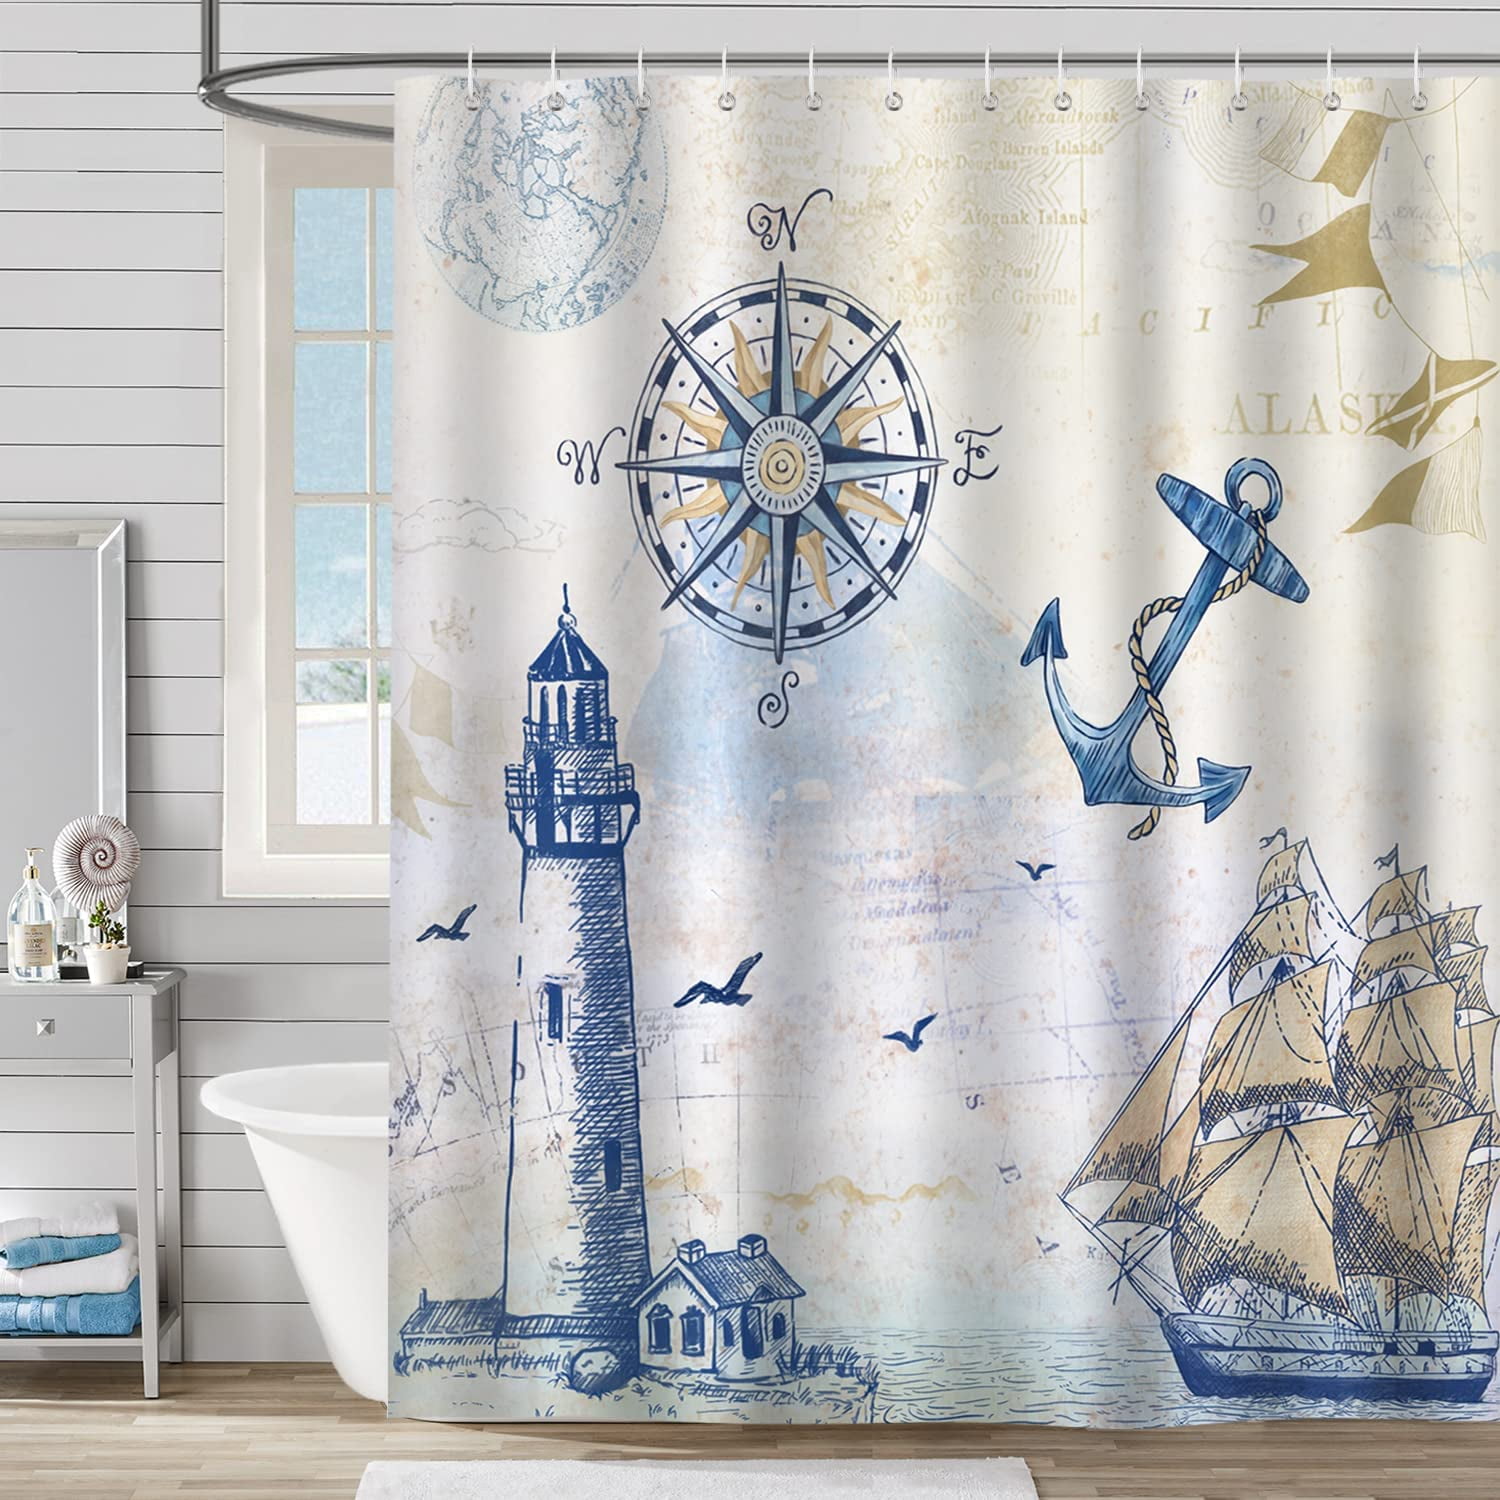 Lighthouse Waterproof Bathroom Polyester Shower Curtain Liner Water Resistant